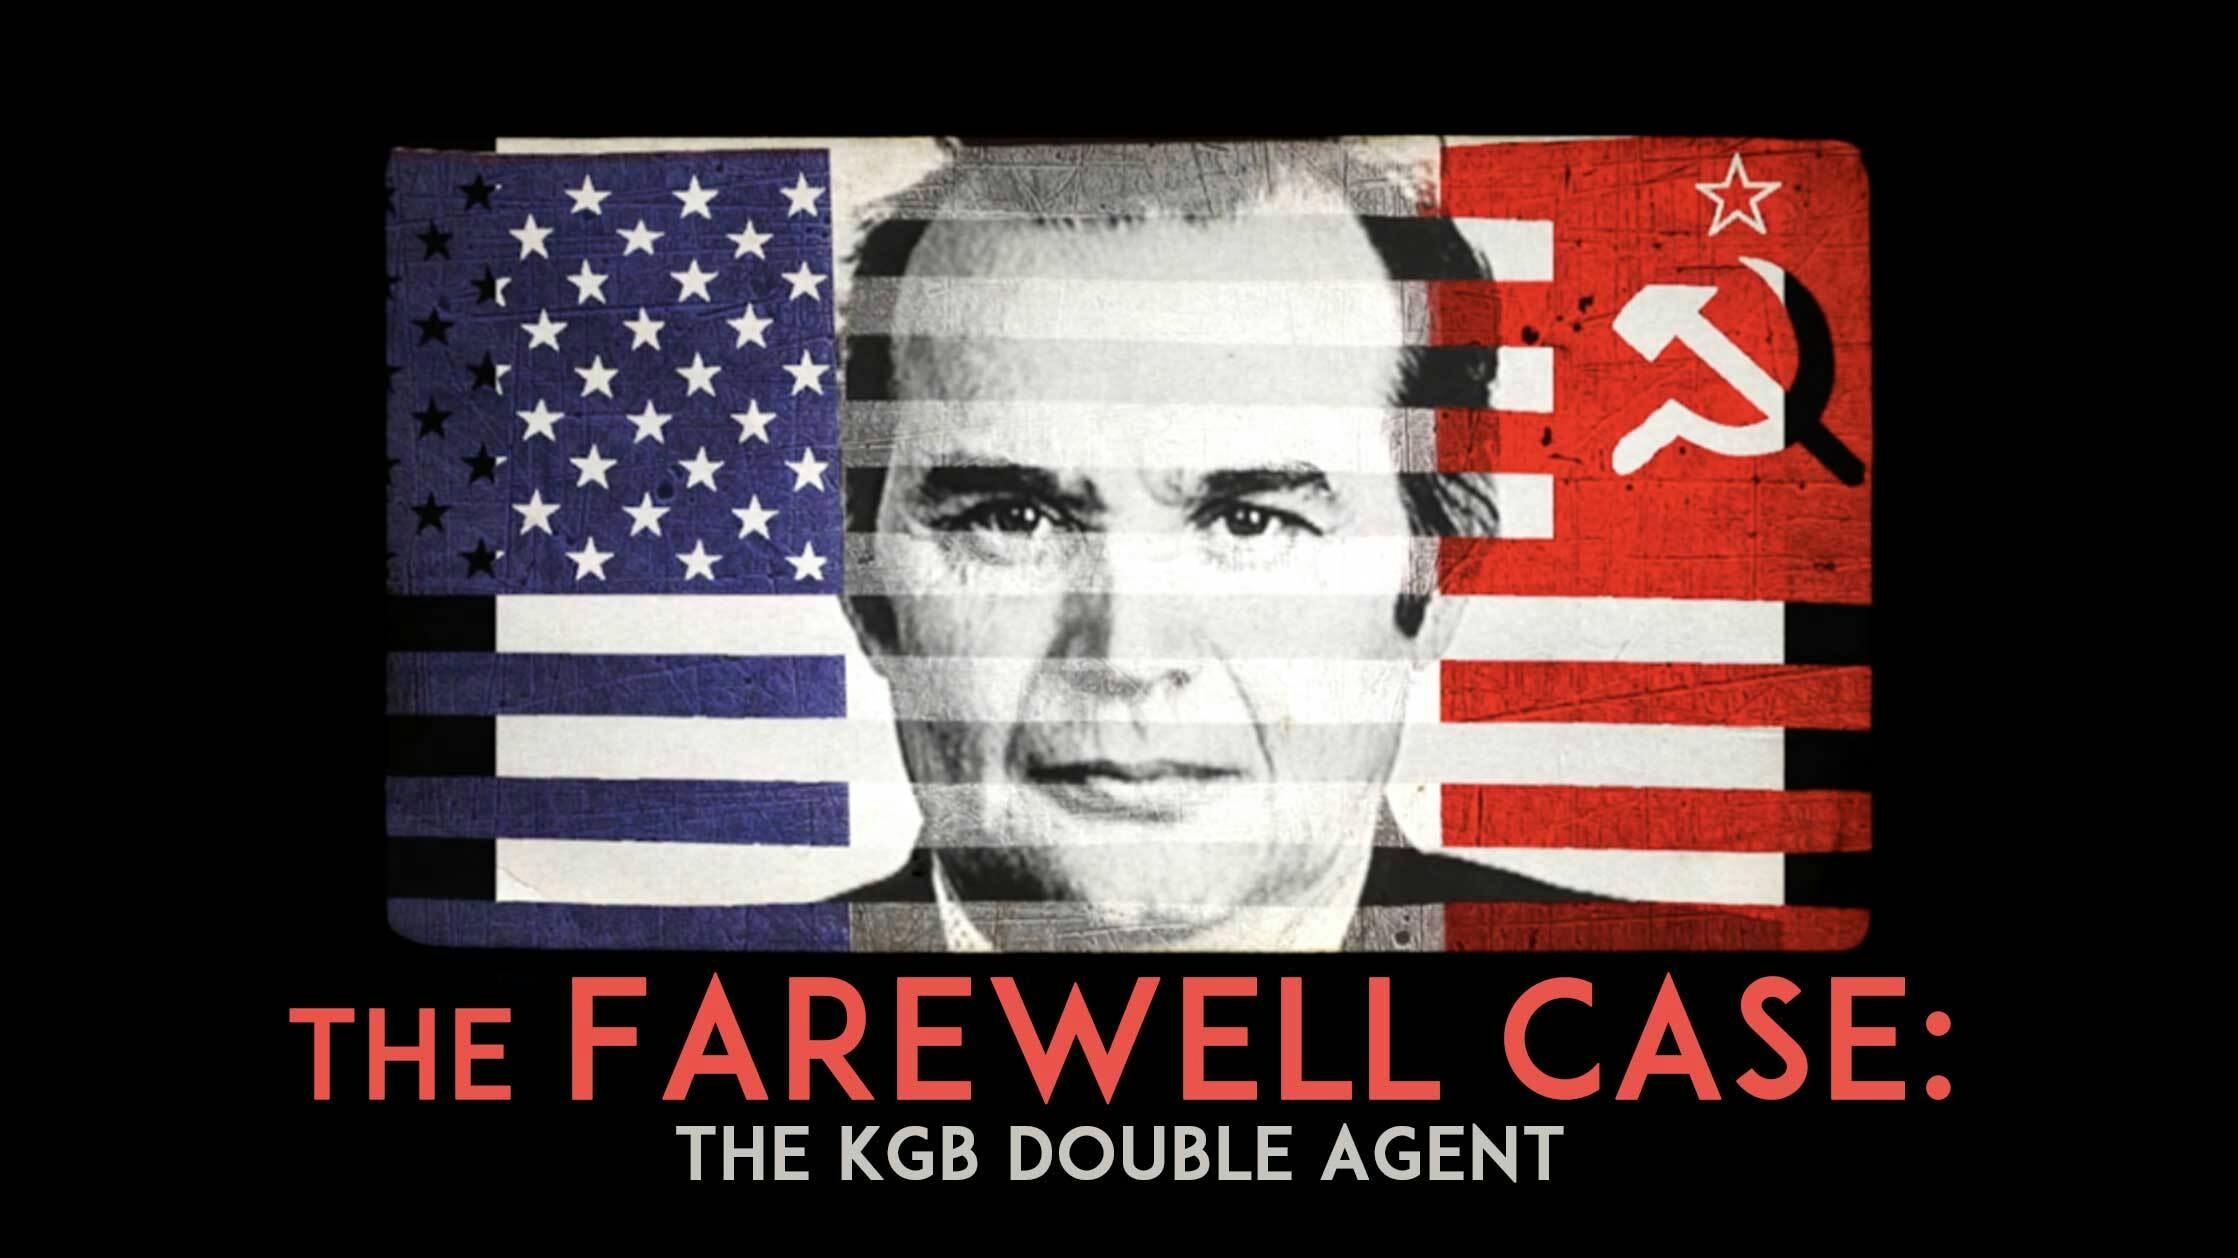 The Farewell Case: The KGB Double Agent